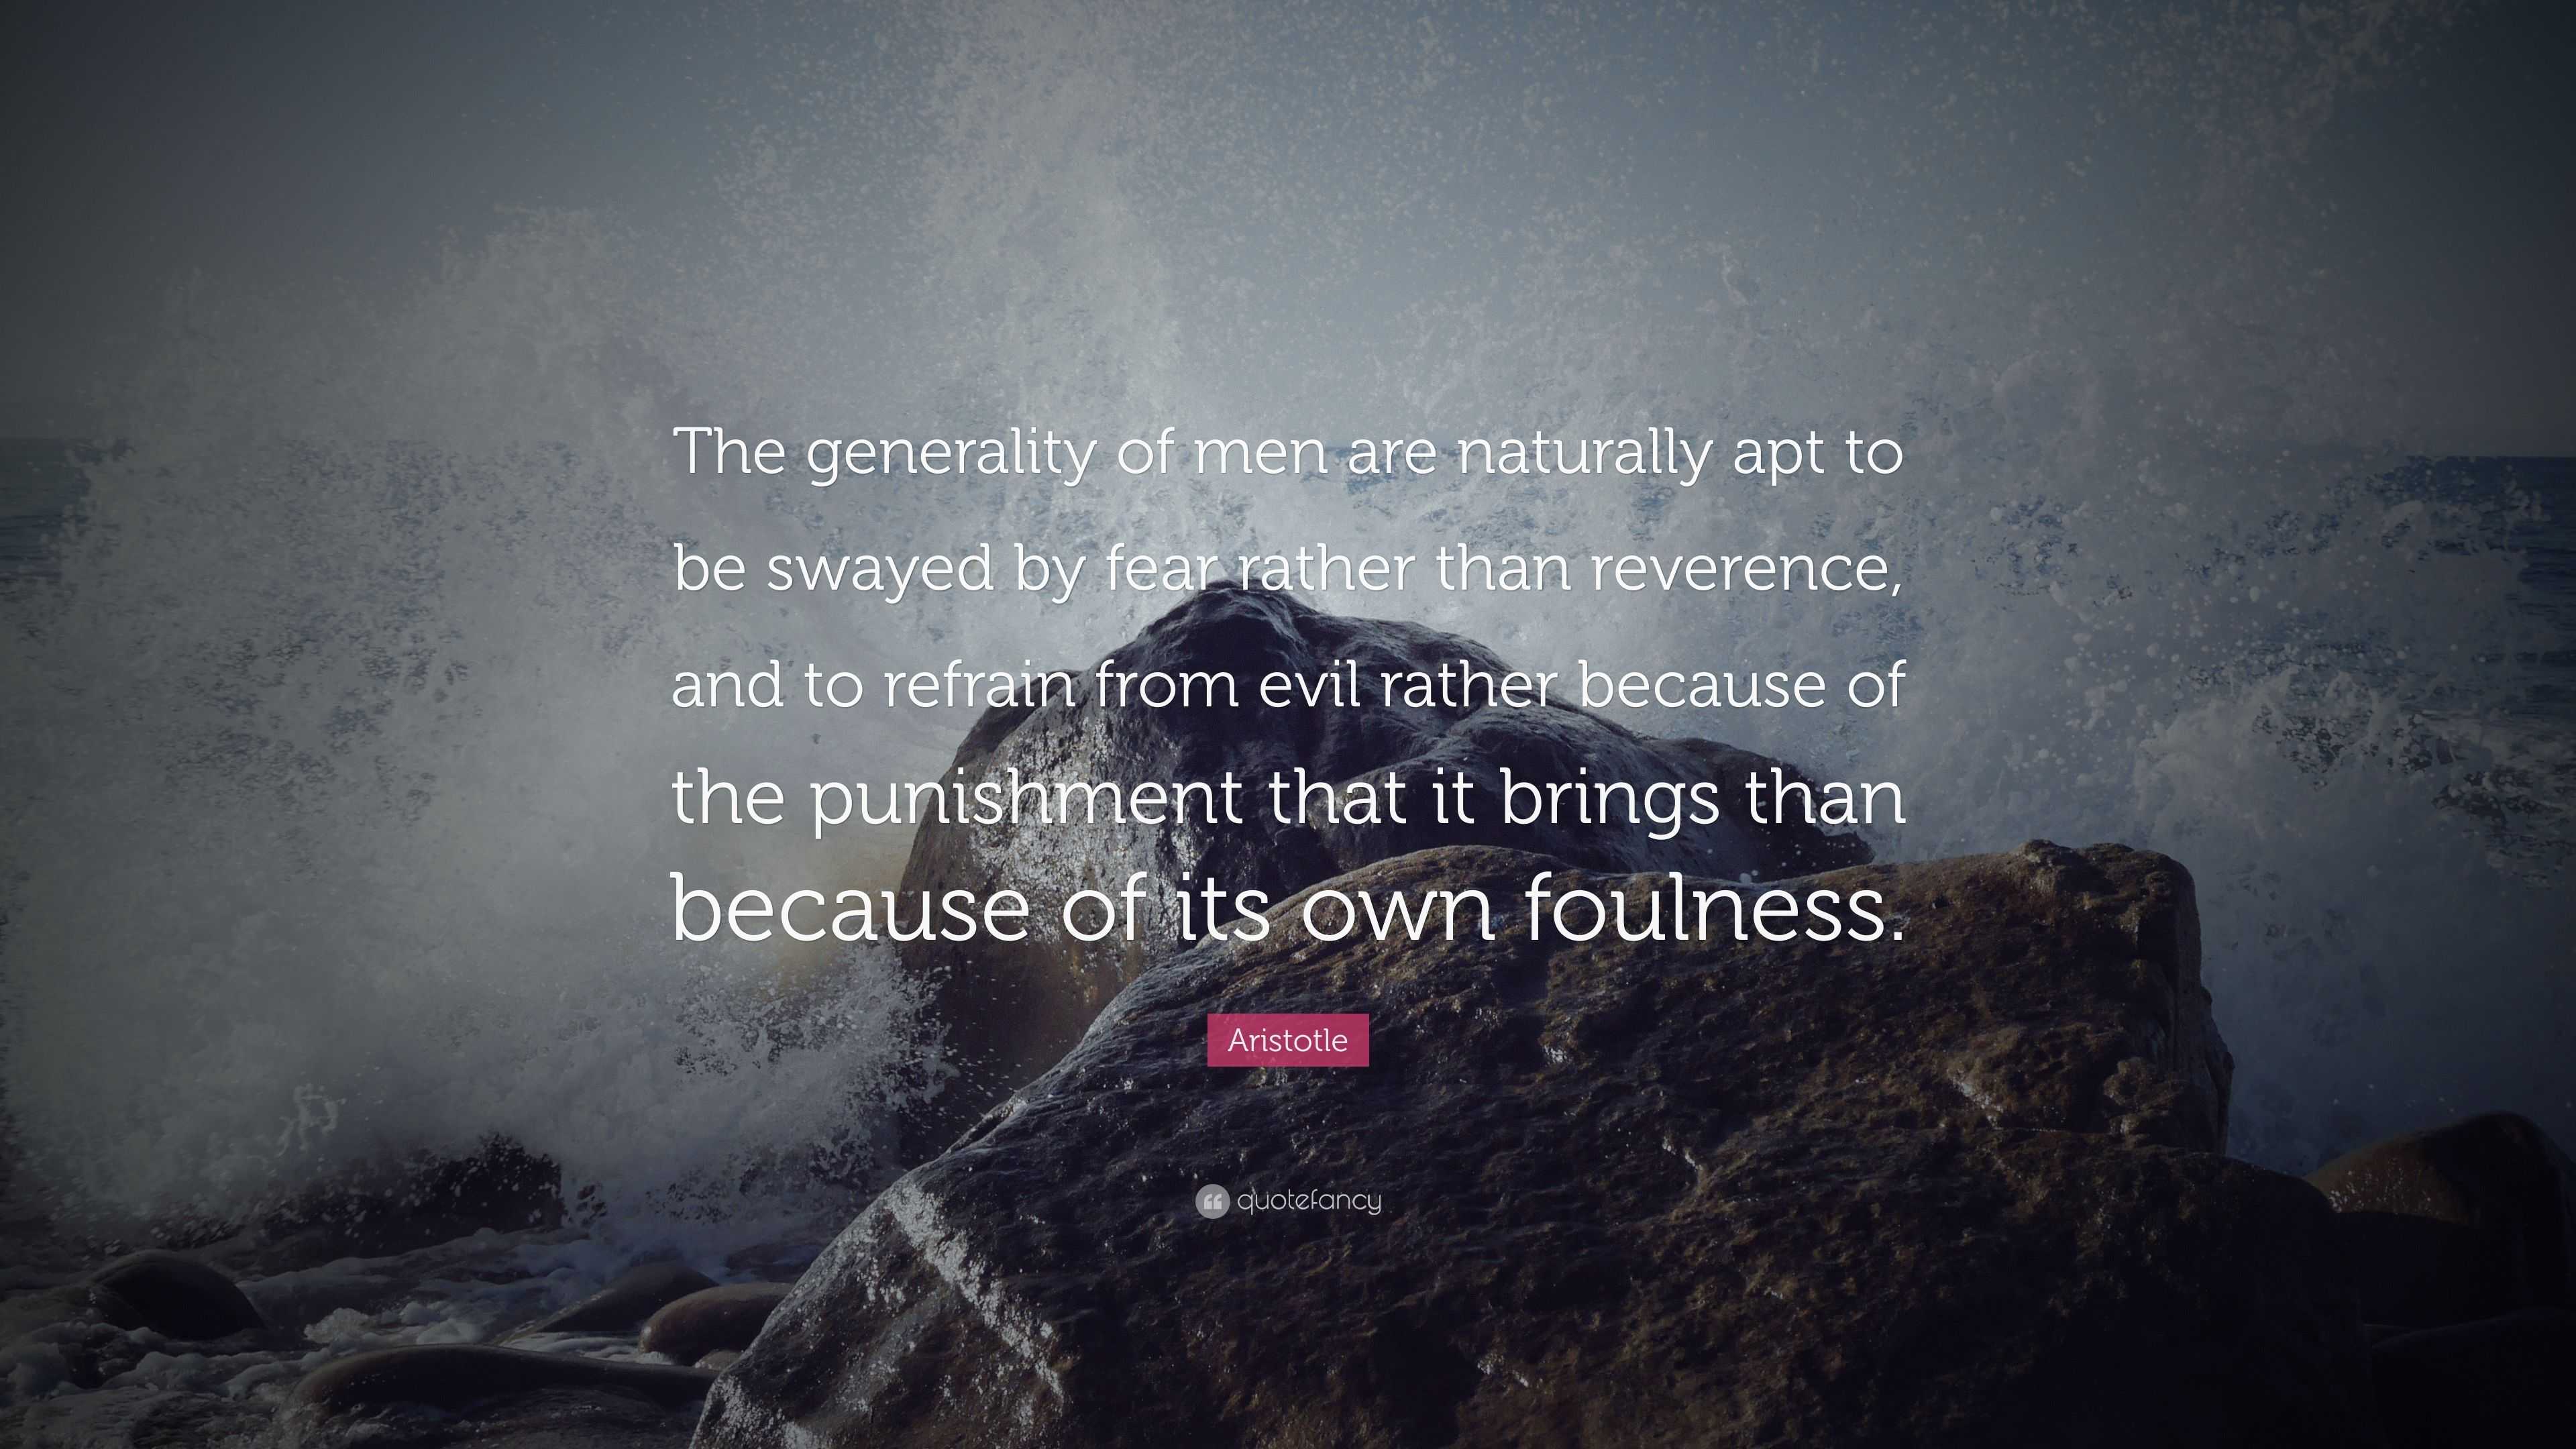 Aristotle Quote: “The generality of men are naturally apt to be swayed ...